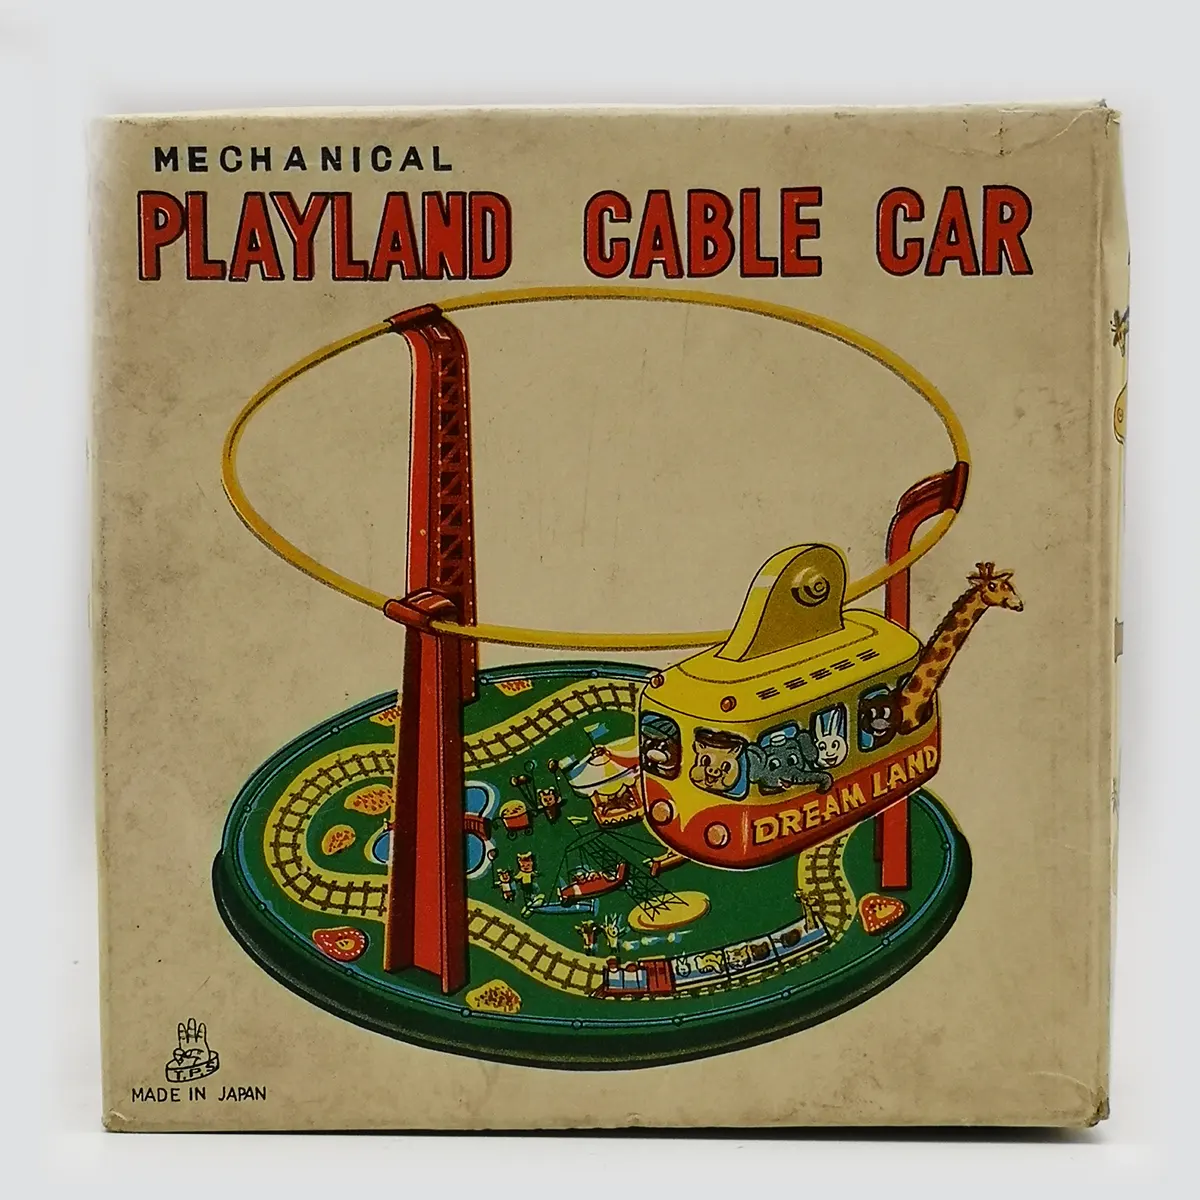 mechanical playland cable car